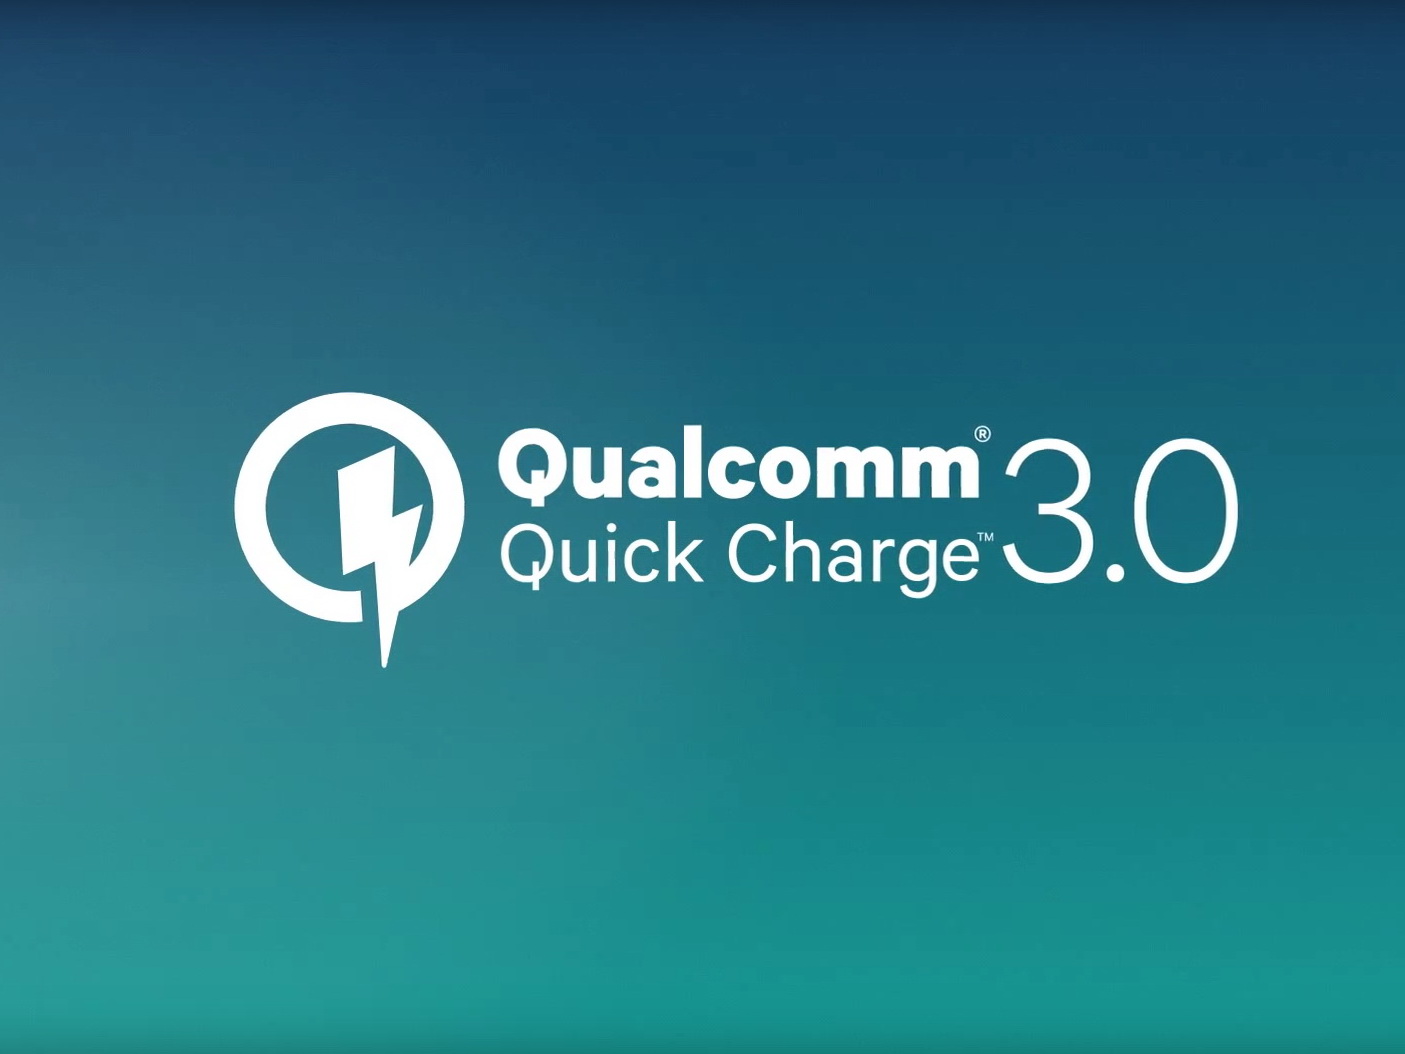 Qualcomm Quick Charge 3.0 promises 0 to 80 percent in 35 minutes -   News